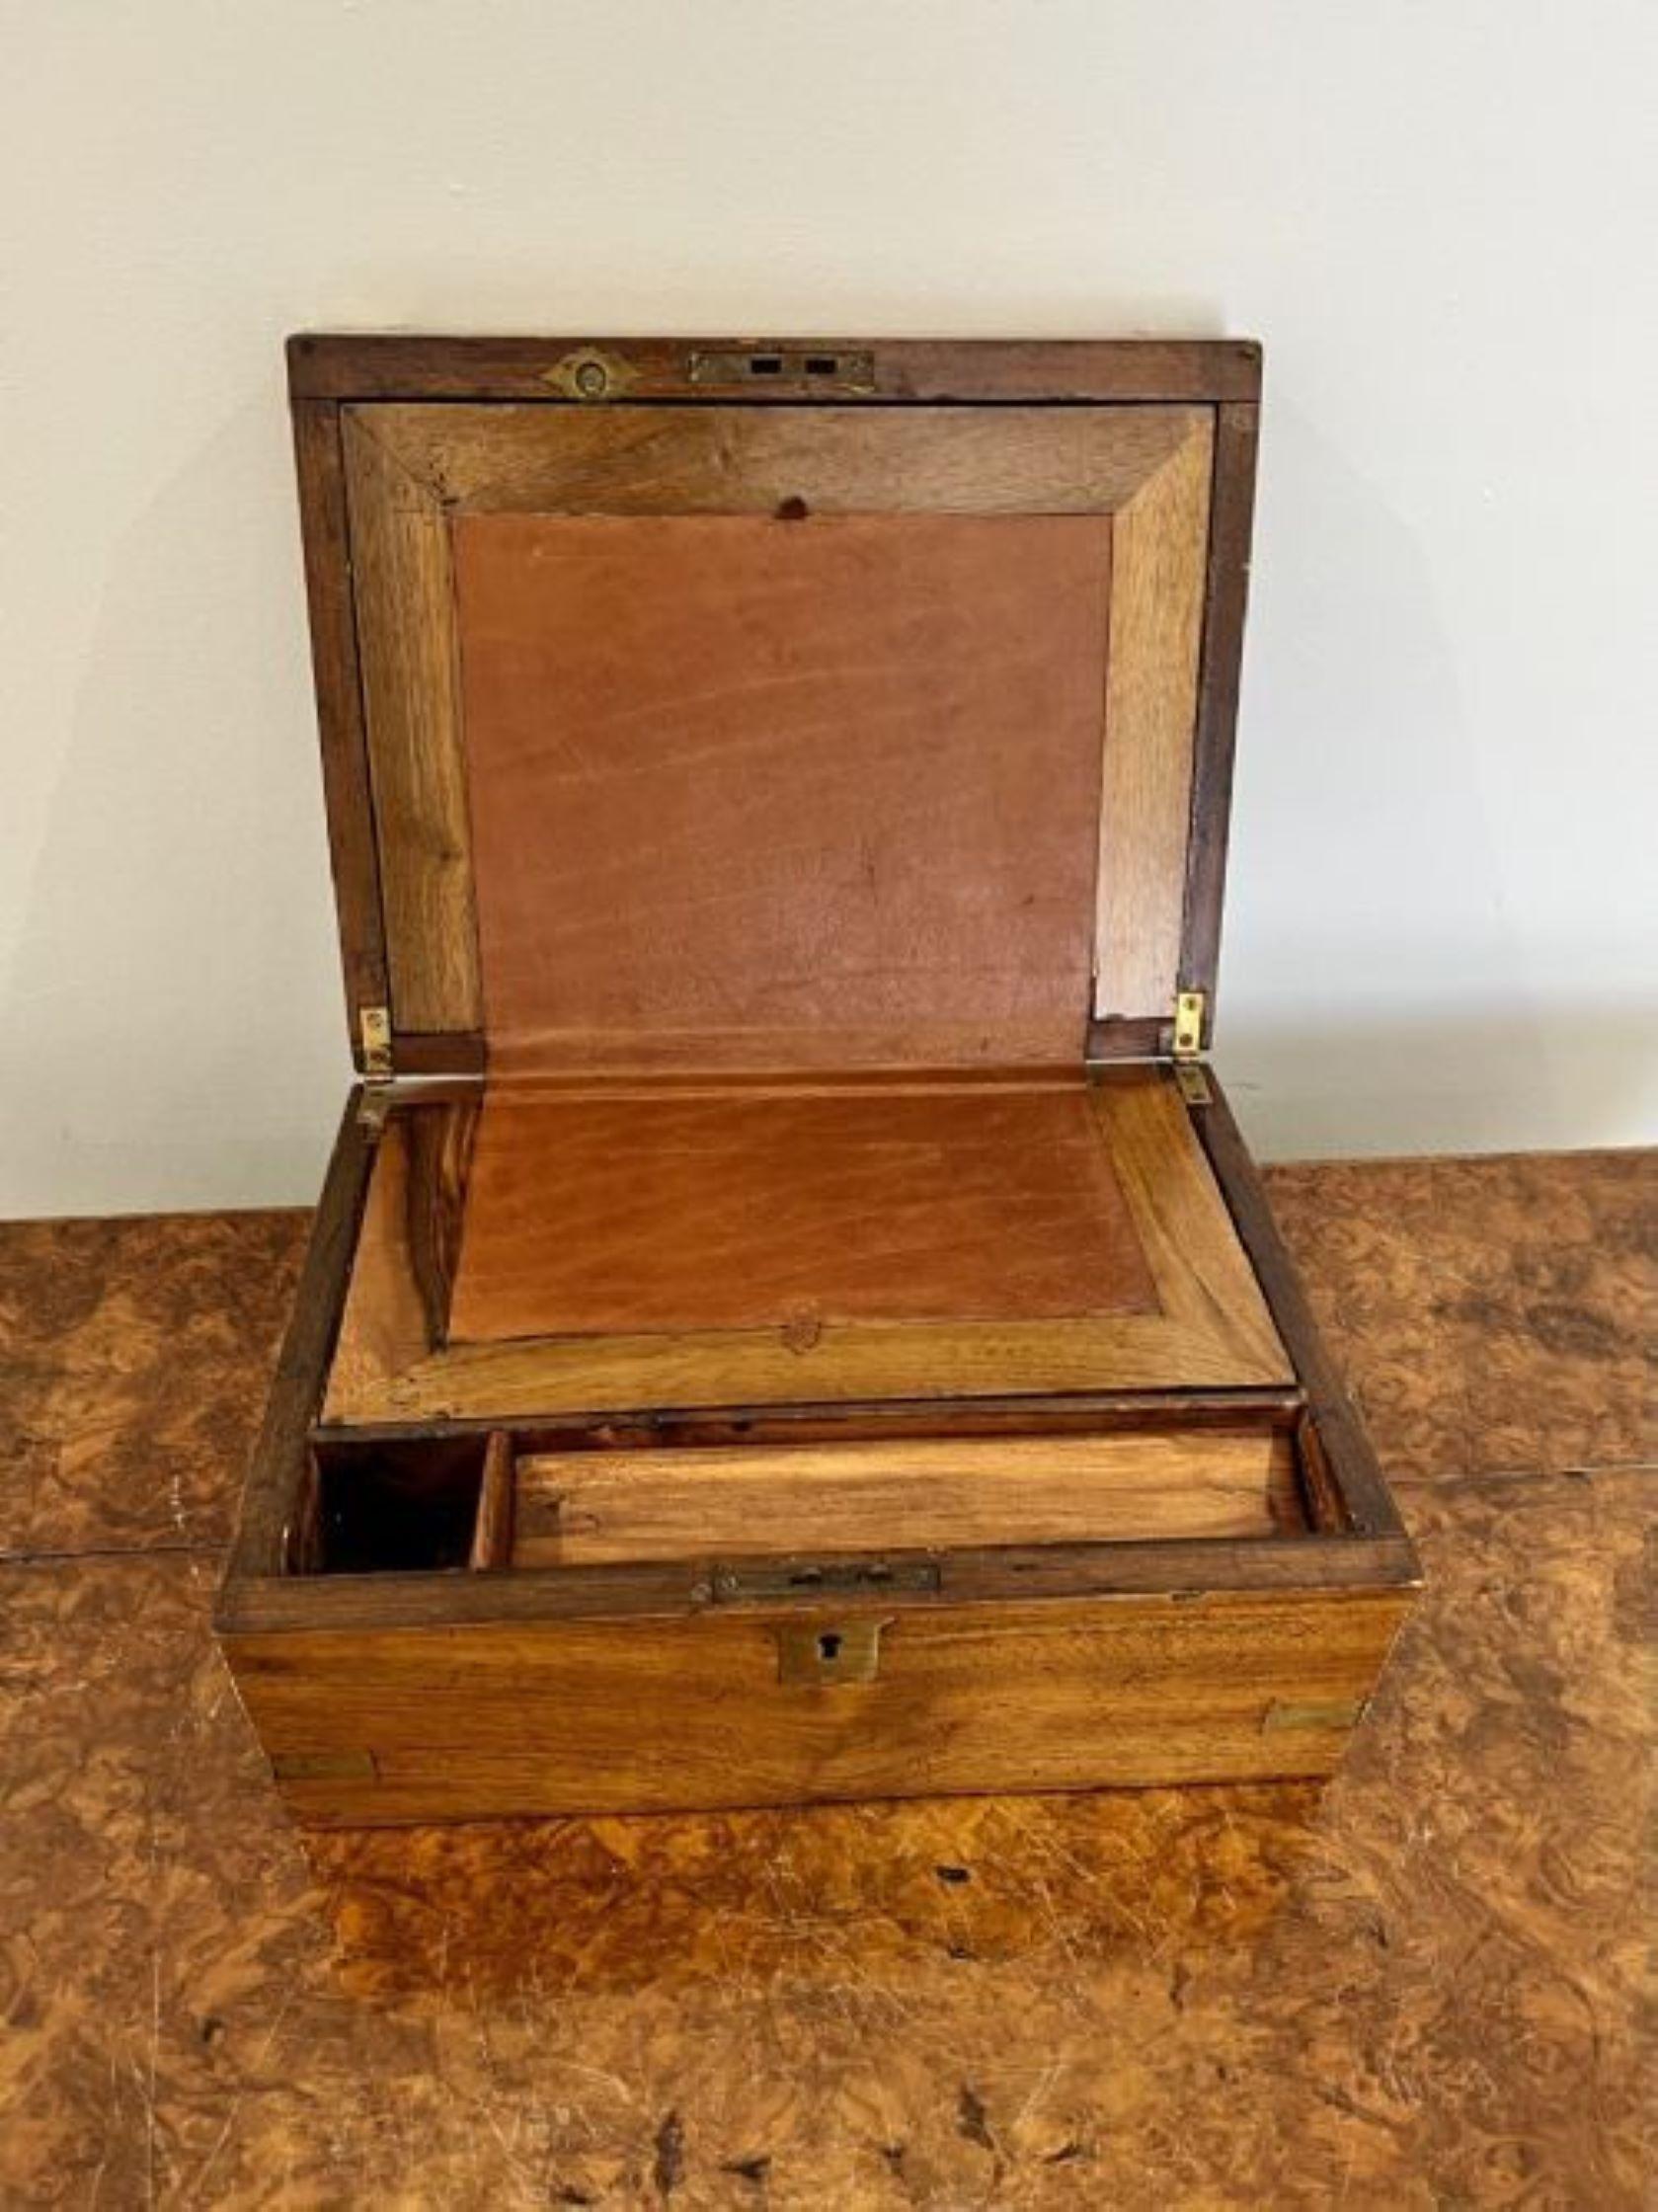 Quality antique Victorian mahogany and brass bound writing box having a quality mahogany writing box with brass bounds opening to reveal a brown leather writing platform and compartmentalised interior